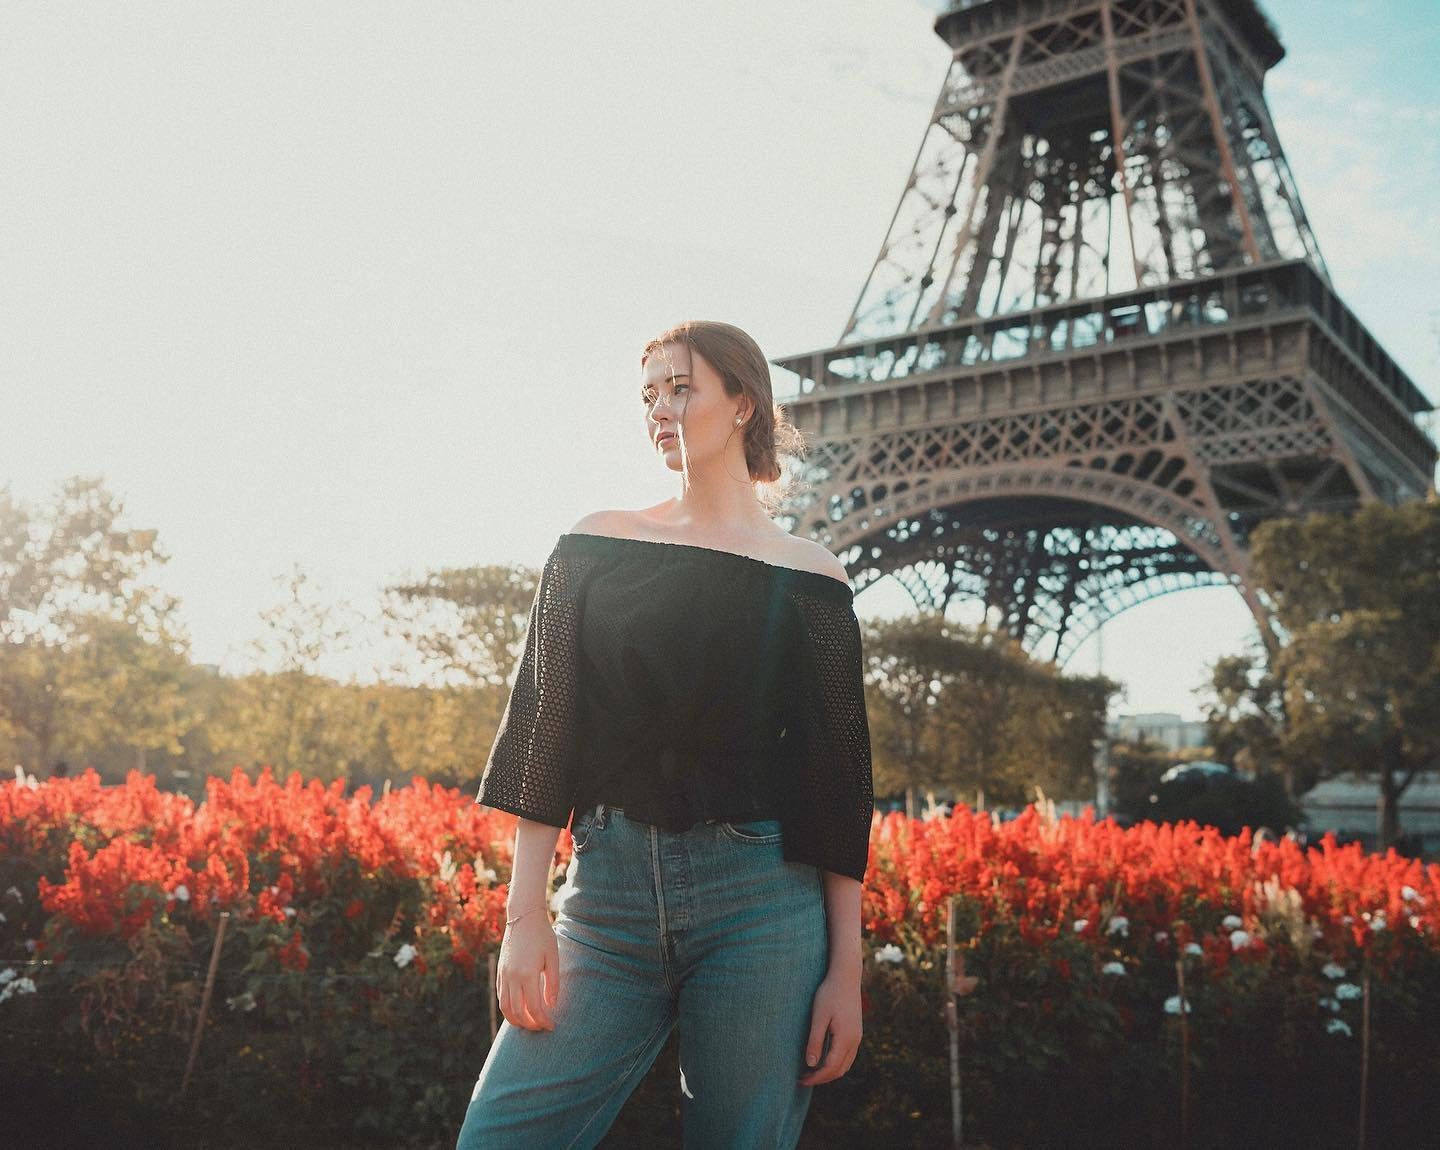 Sophia📍PARIS
🇫🇷 PARIS photoshoot | 파리 스냅 

Booking is available for 3 days in May. 
DM me for availability and pricing!

7 May 
9 May 
10 May 

#paris
#eiffeltower
#france
#parisphotographer
#pariswedding
#parisienne
#portrait 
#praguephotographer